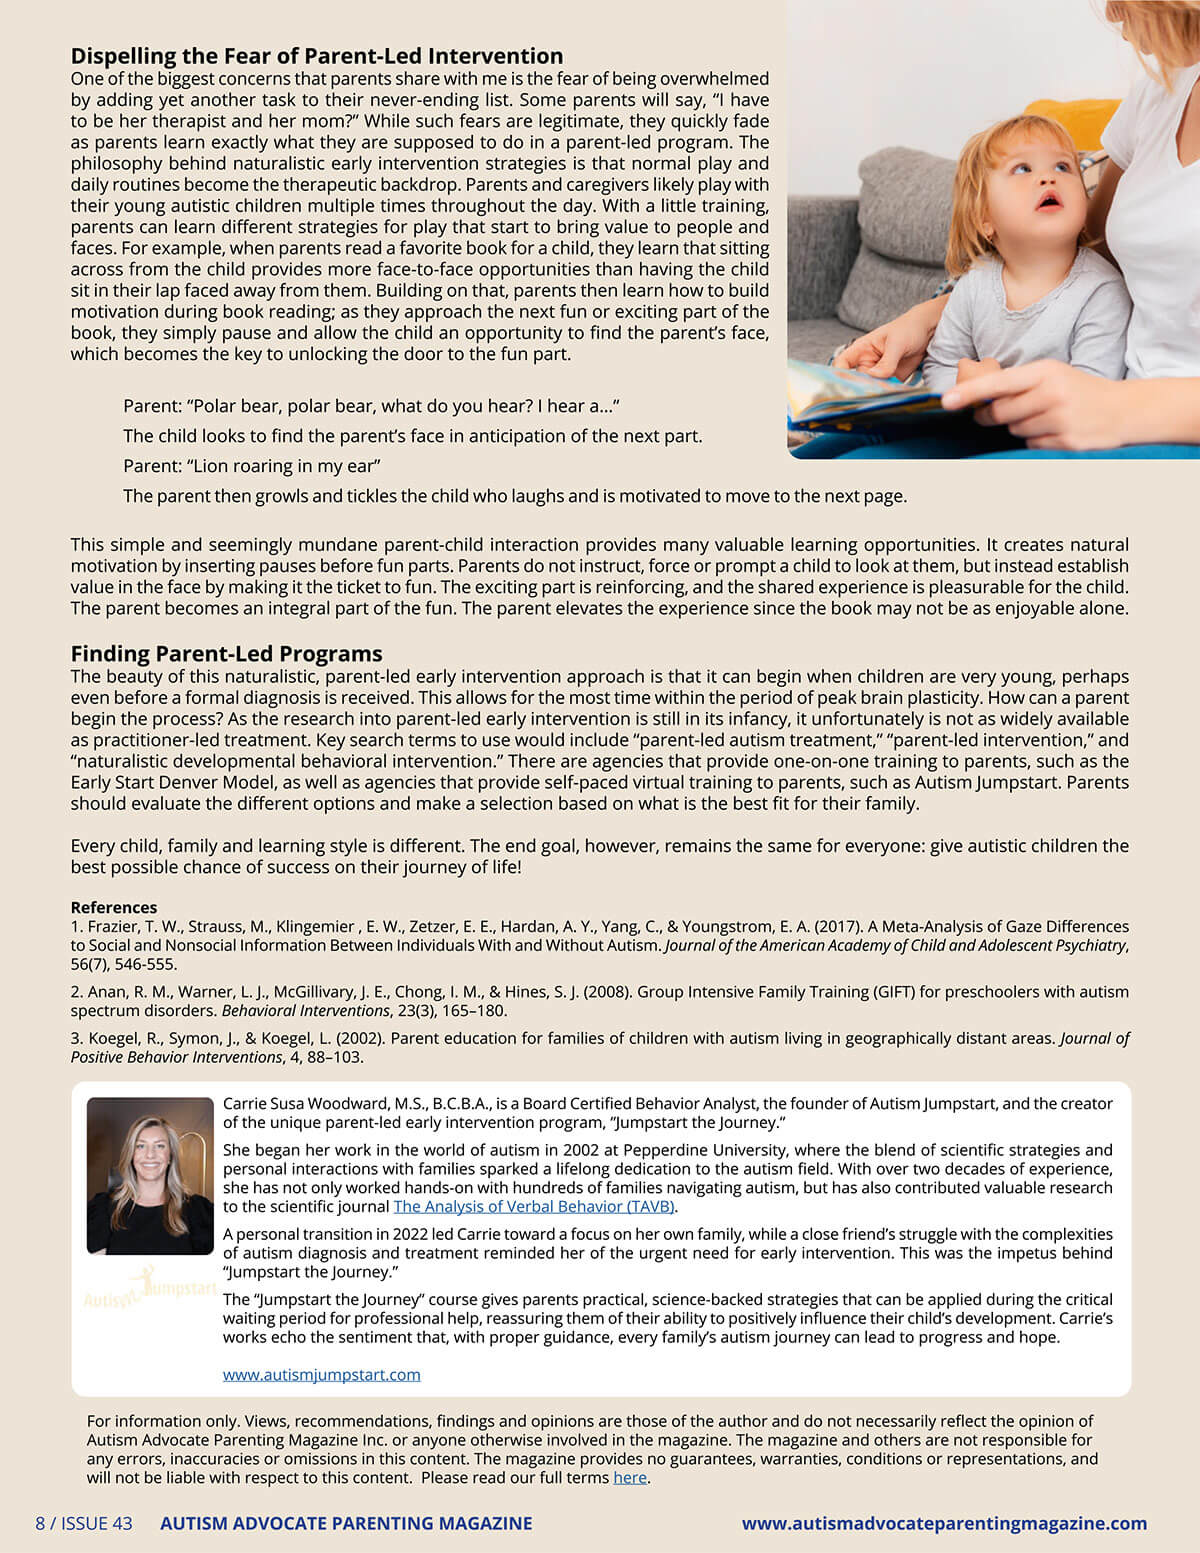 Third page of an article discussing 'Dispelling the Fear of Parent-Led Intervention' in autism treatment, with a sidebar featuring Carrie Susa Woodward, M.S., B.C.B.A. It includes an image of a mother reading to her young child, emphasizing the importance of natural play and parent involvement. Published in Autism Advocate Parenting Magazine, Issue 43.